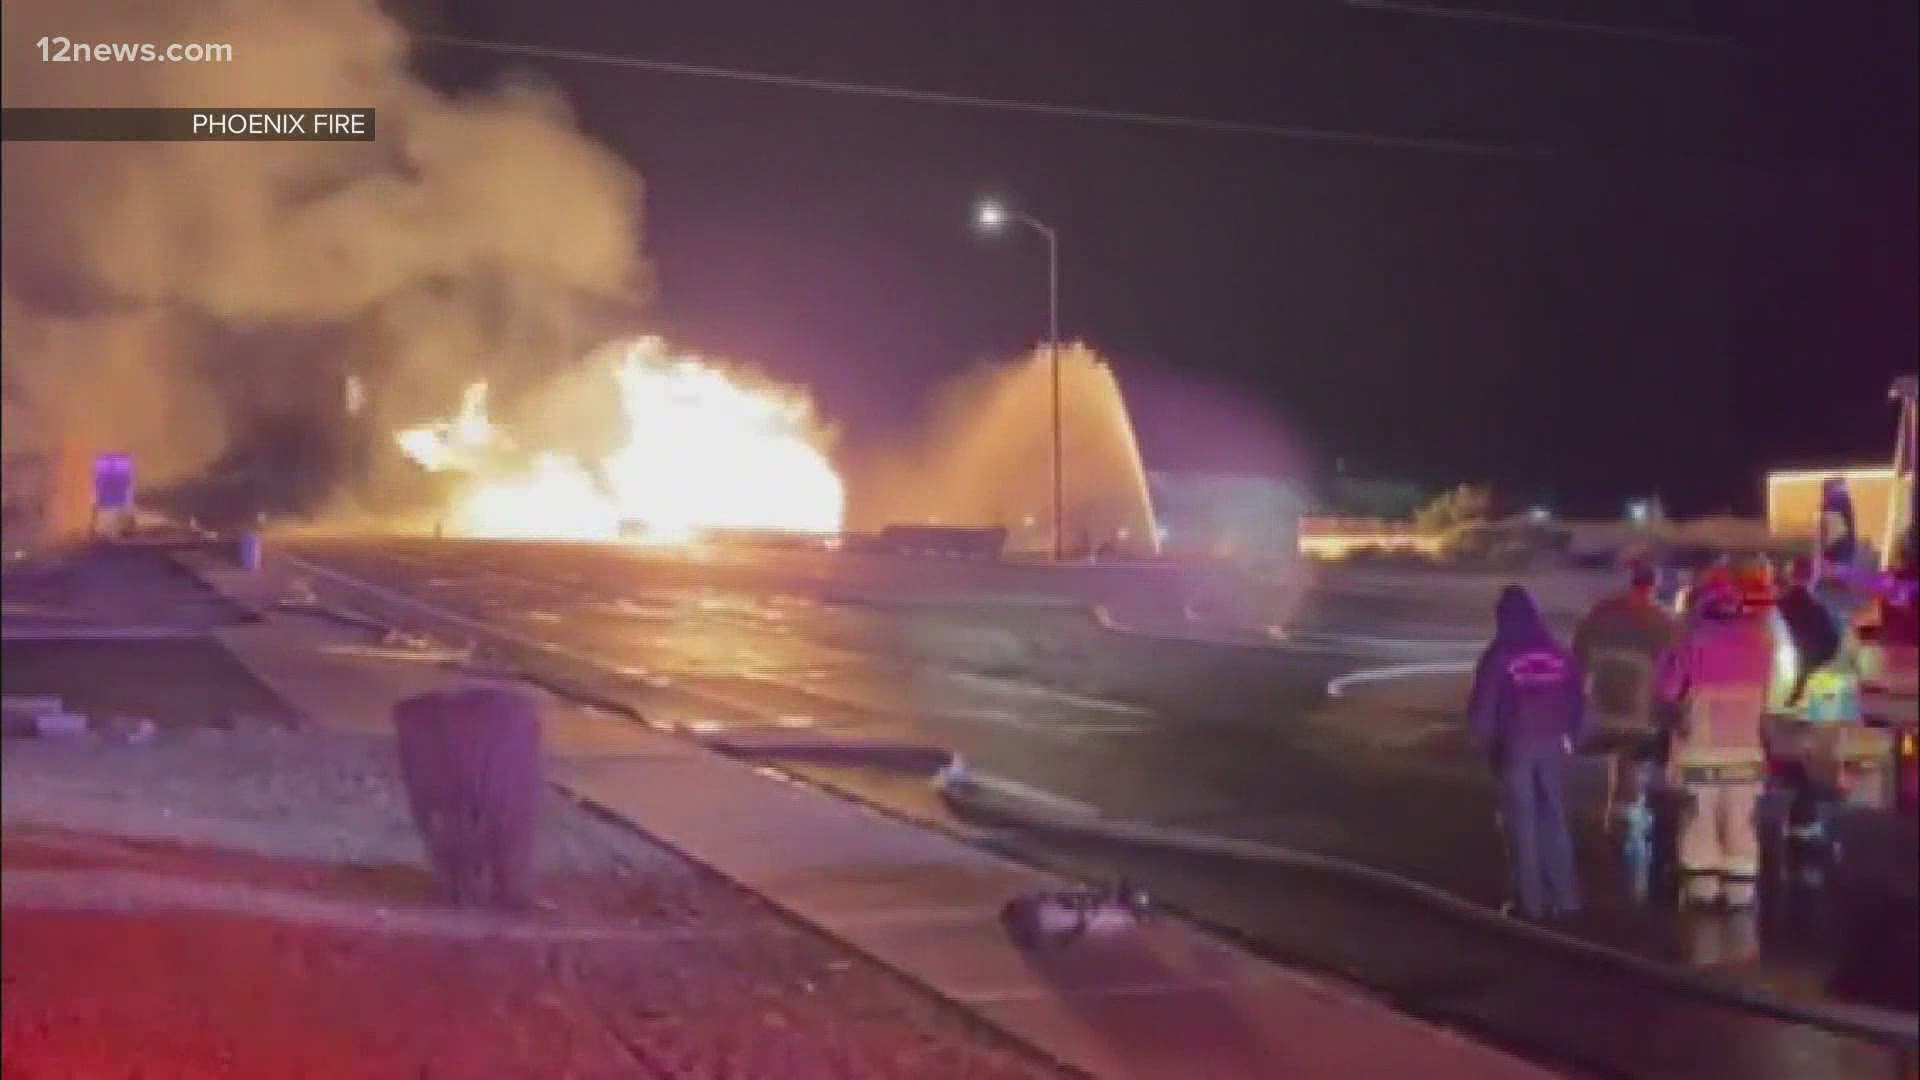 A gas line fire sent flames 30 feet into the air and damaged a major bridge across the Salt River. Now, the 7th Street bridge will be closed for months.